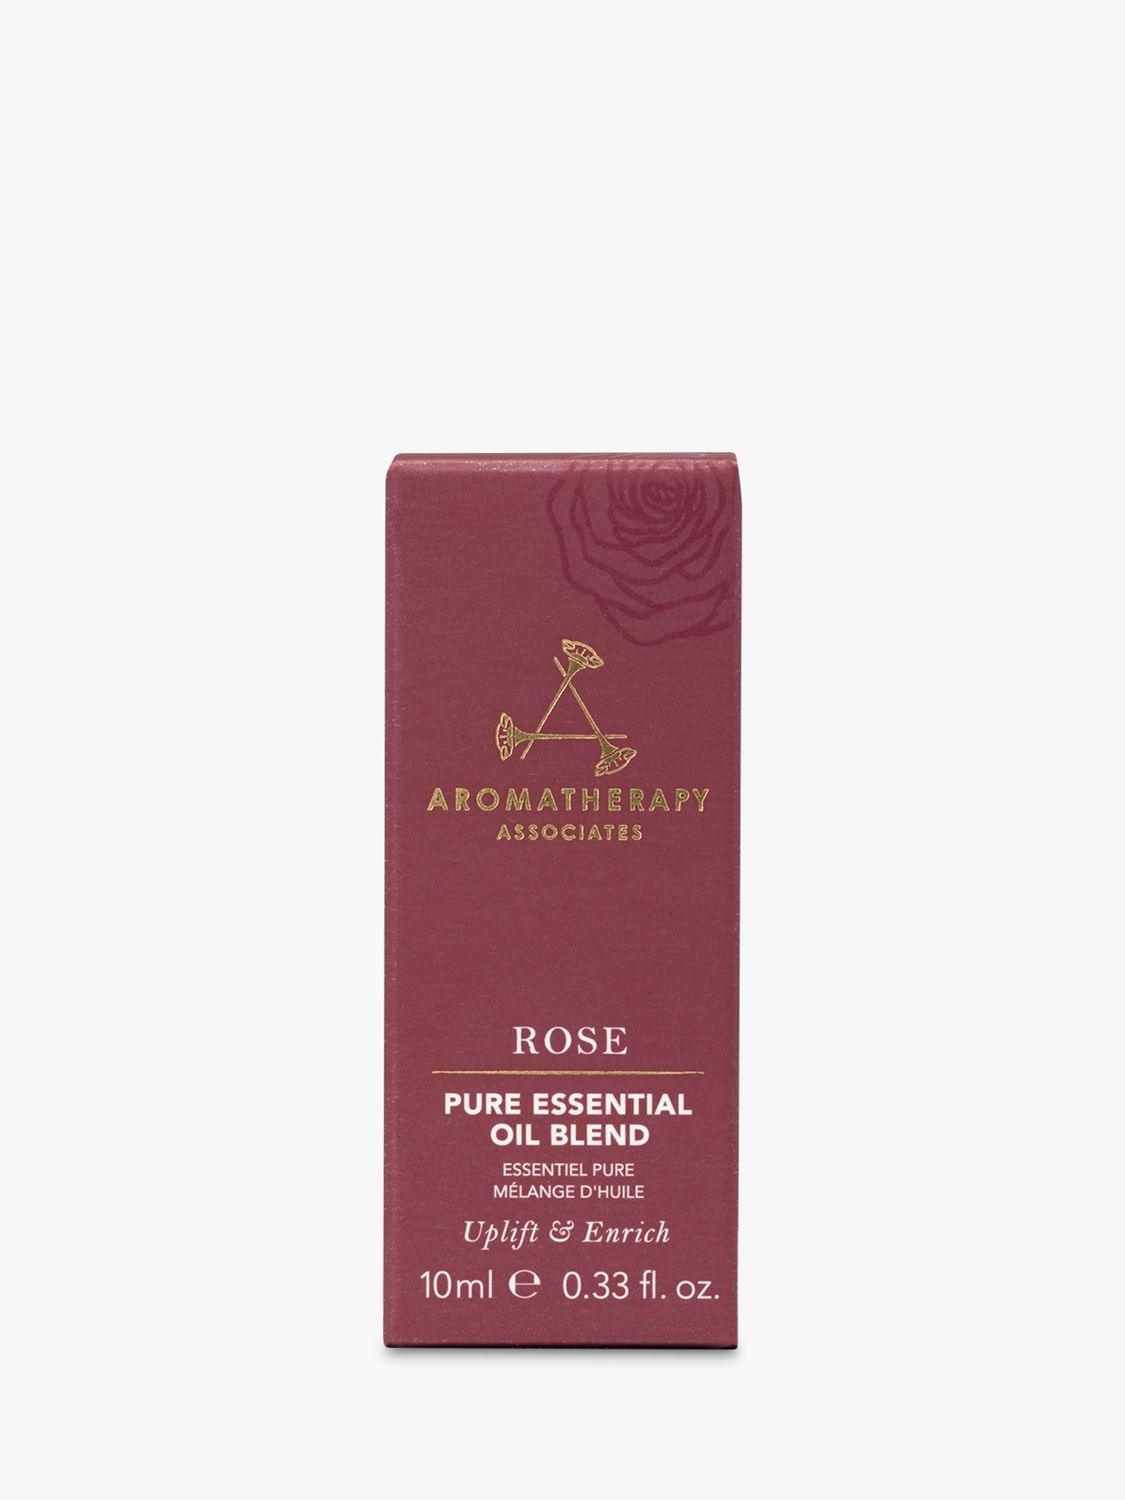 Aromatherapy Associates Rose Pure Essential Oil Blend, 10ml 3